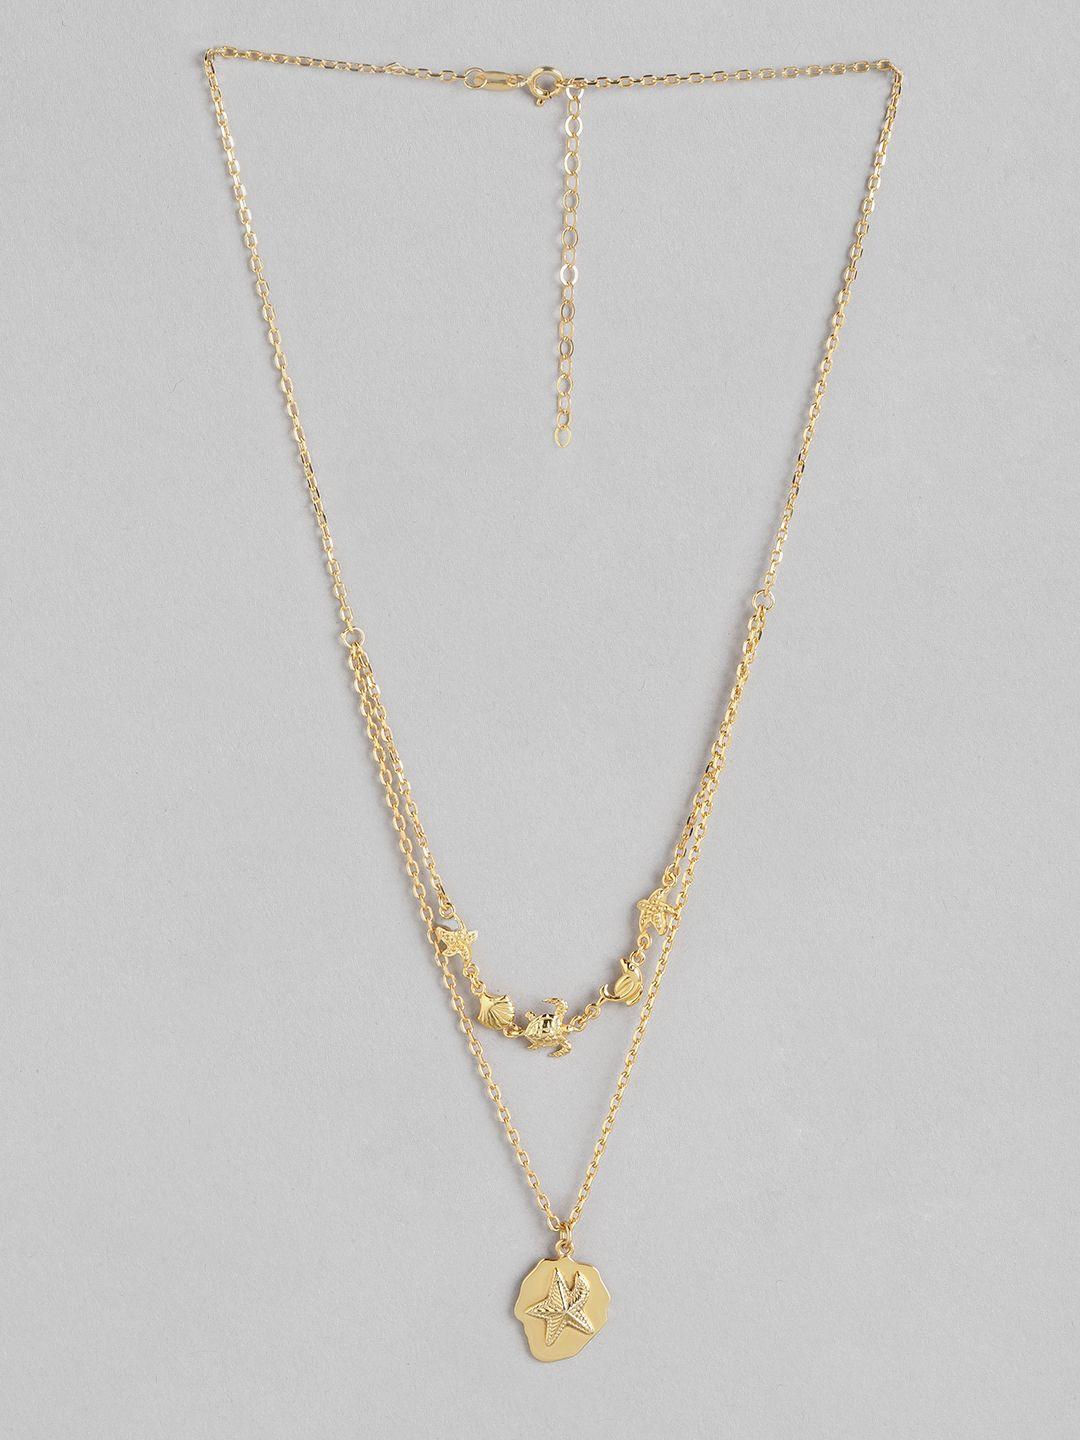 carlton london brass gold-plated layered necklace